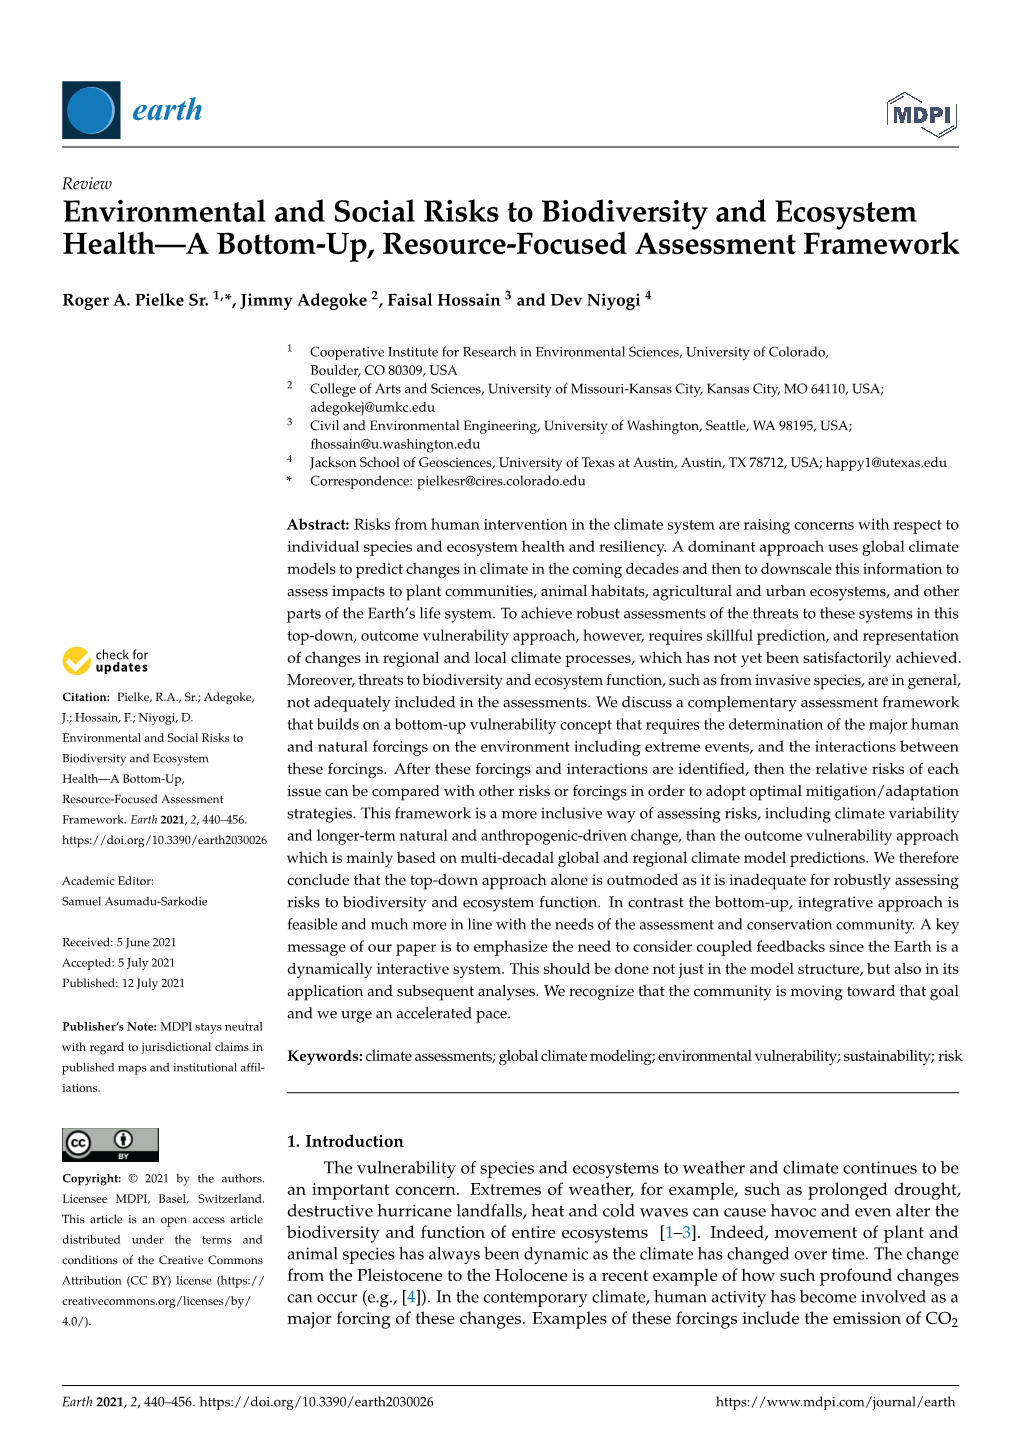 Environmental and Social Risks to Biodiversity and Ecosystem Health—A Bottom-Up, Resource-Focused Assessment Framework